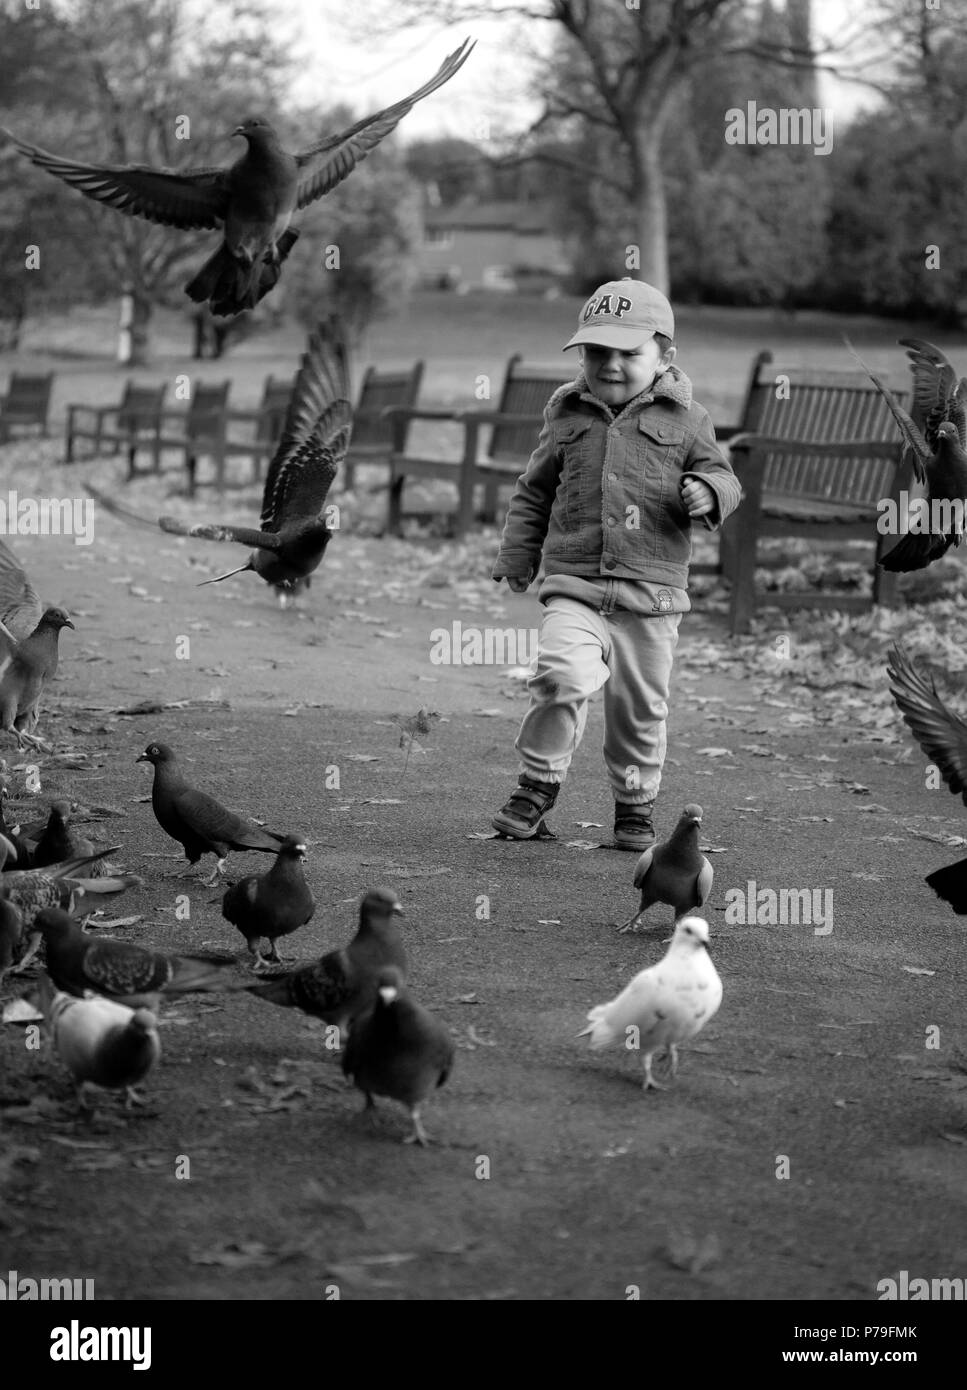 A boy chasing pigeons in the park Stock Photo